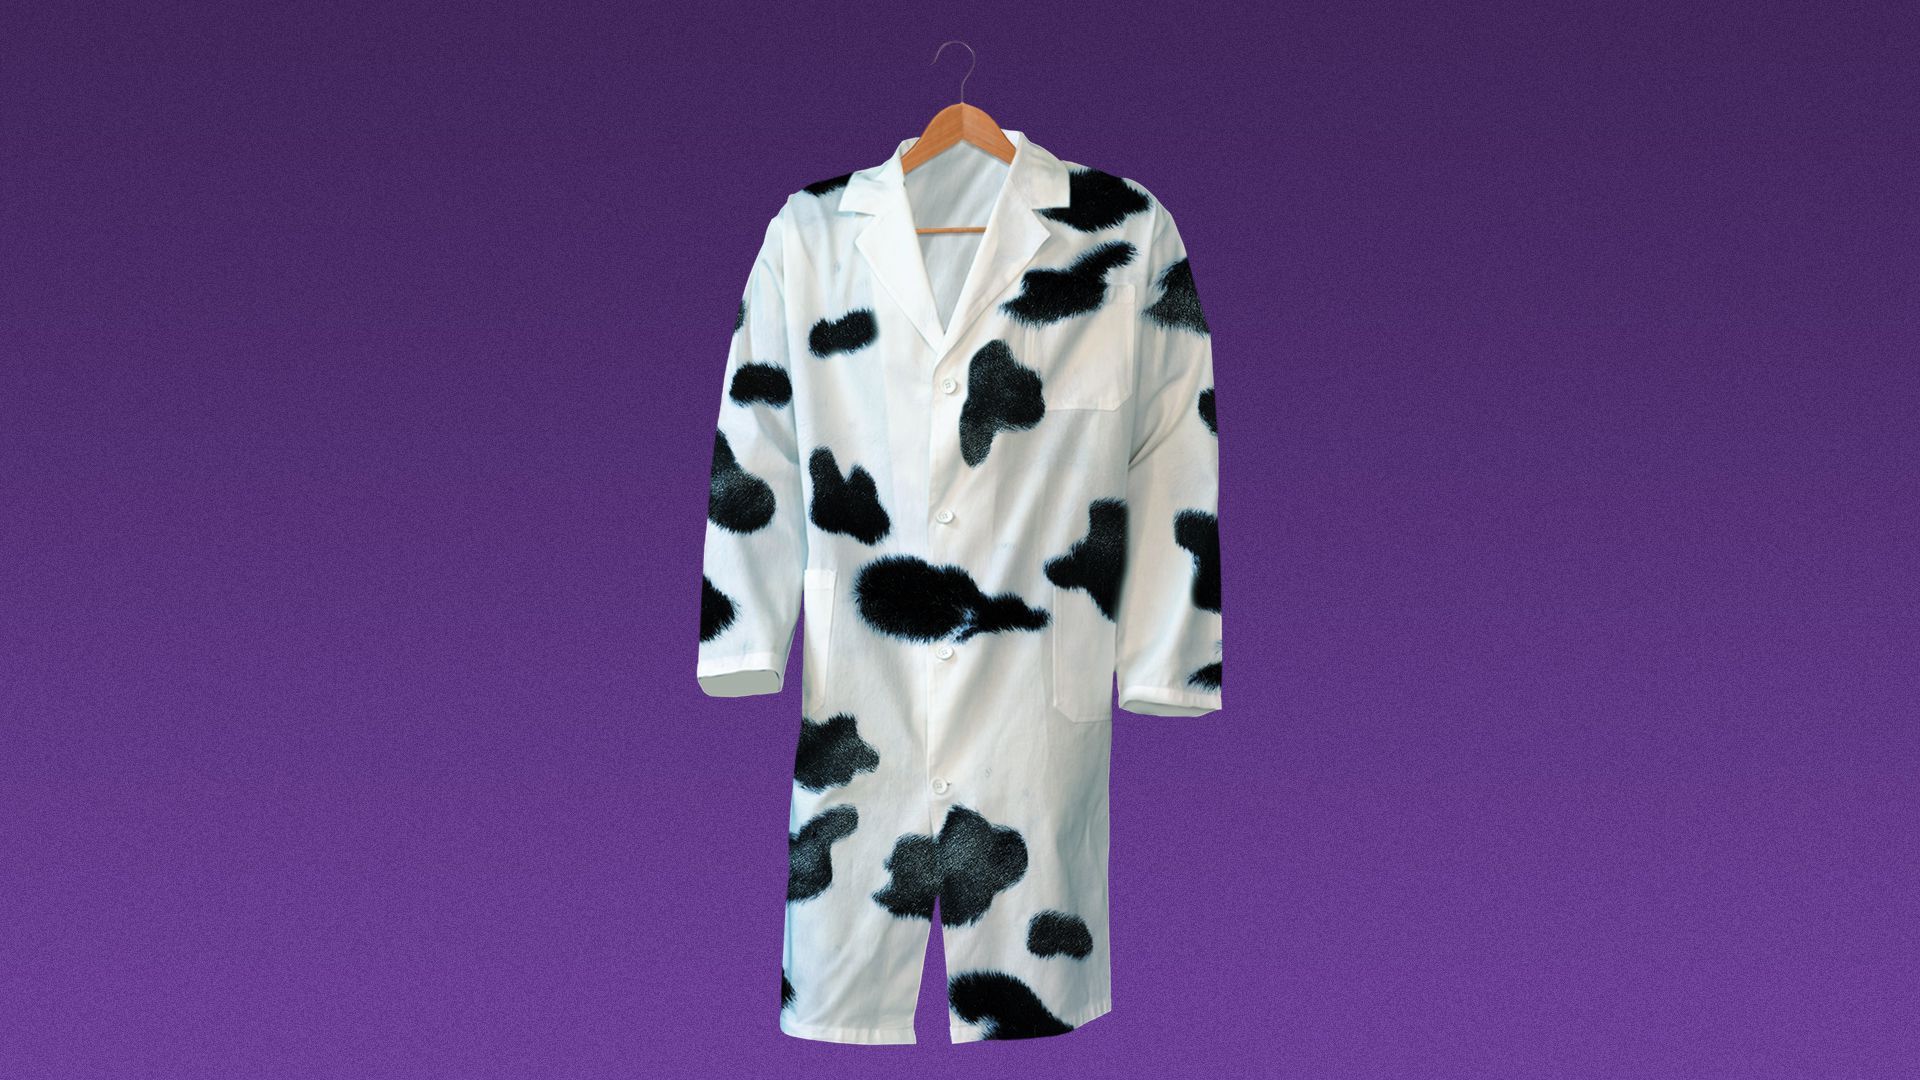 Illustration of a lab coat with cow spots. 